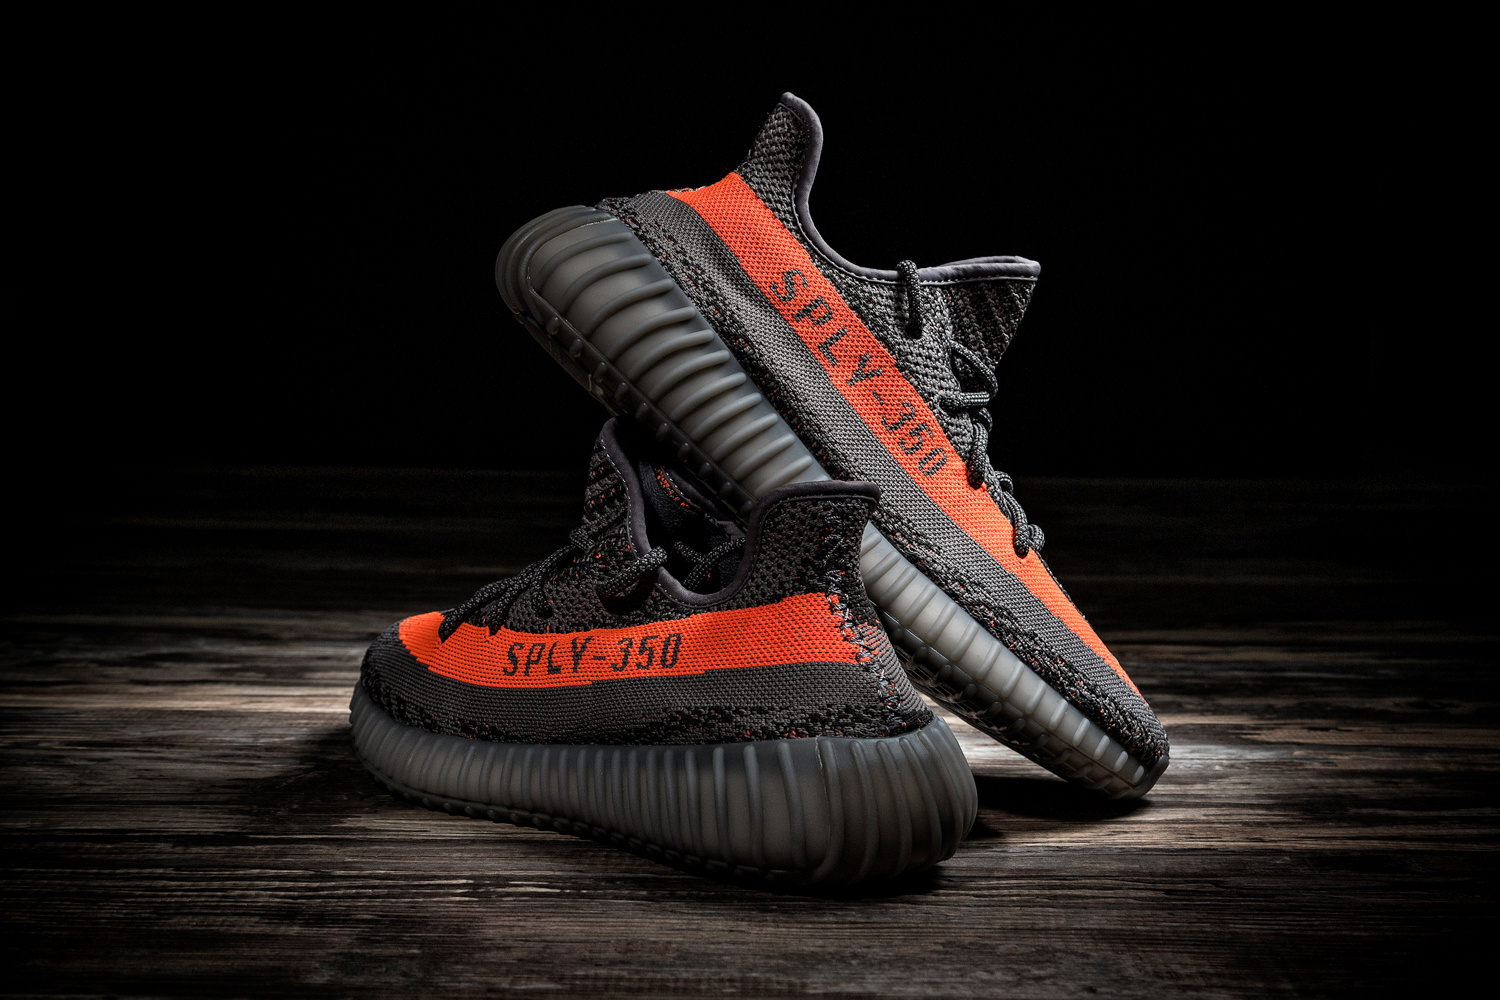 Free download YEEZY Boost 350 V2 Re Releases on HBX Archive